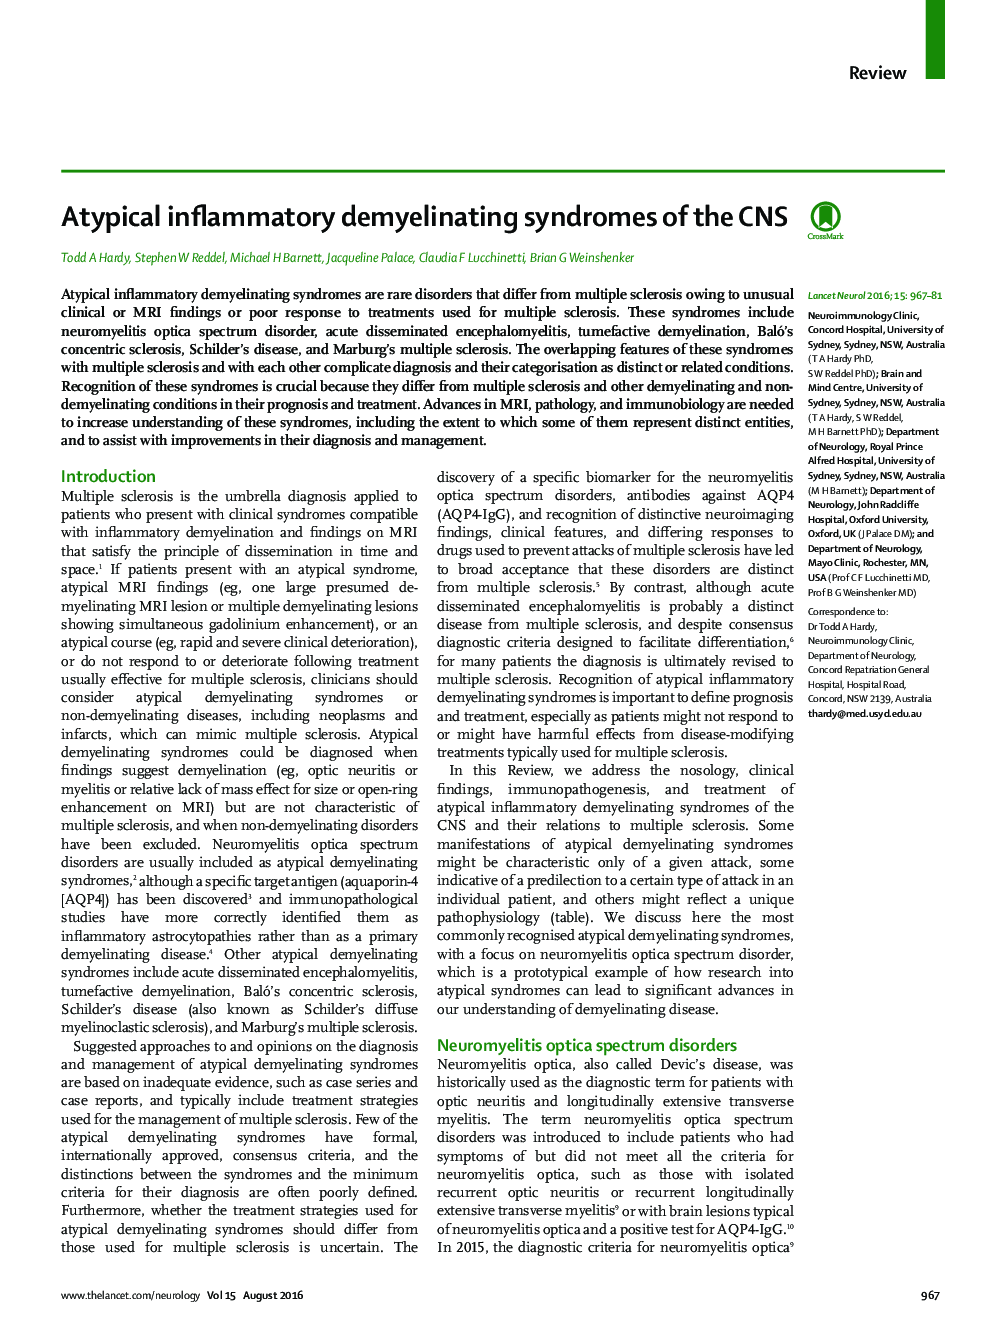 Atypical inflammatory demyelinating syndromes of the CNS